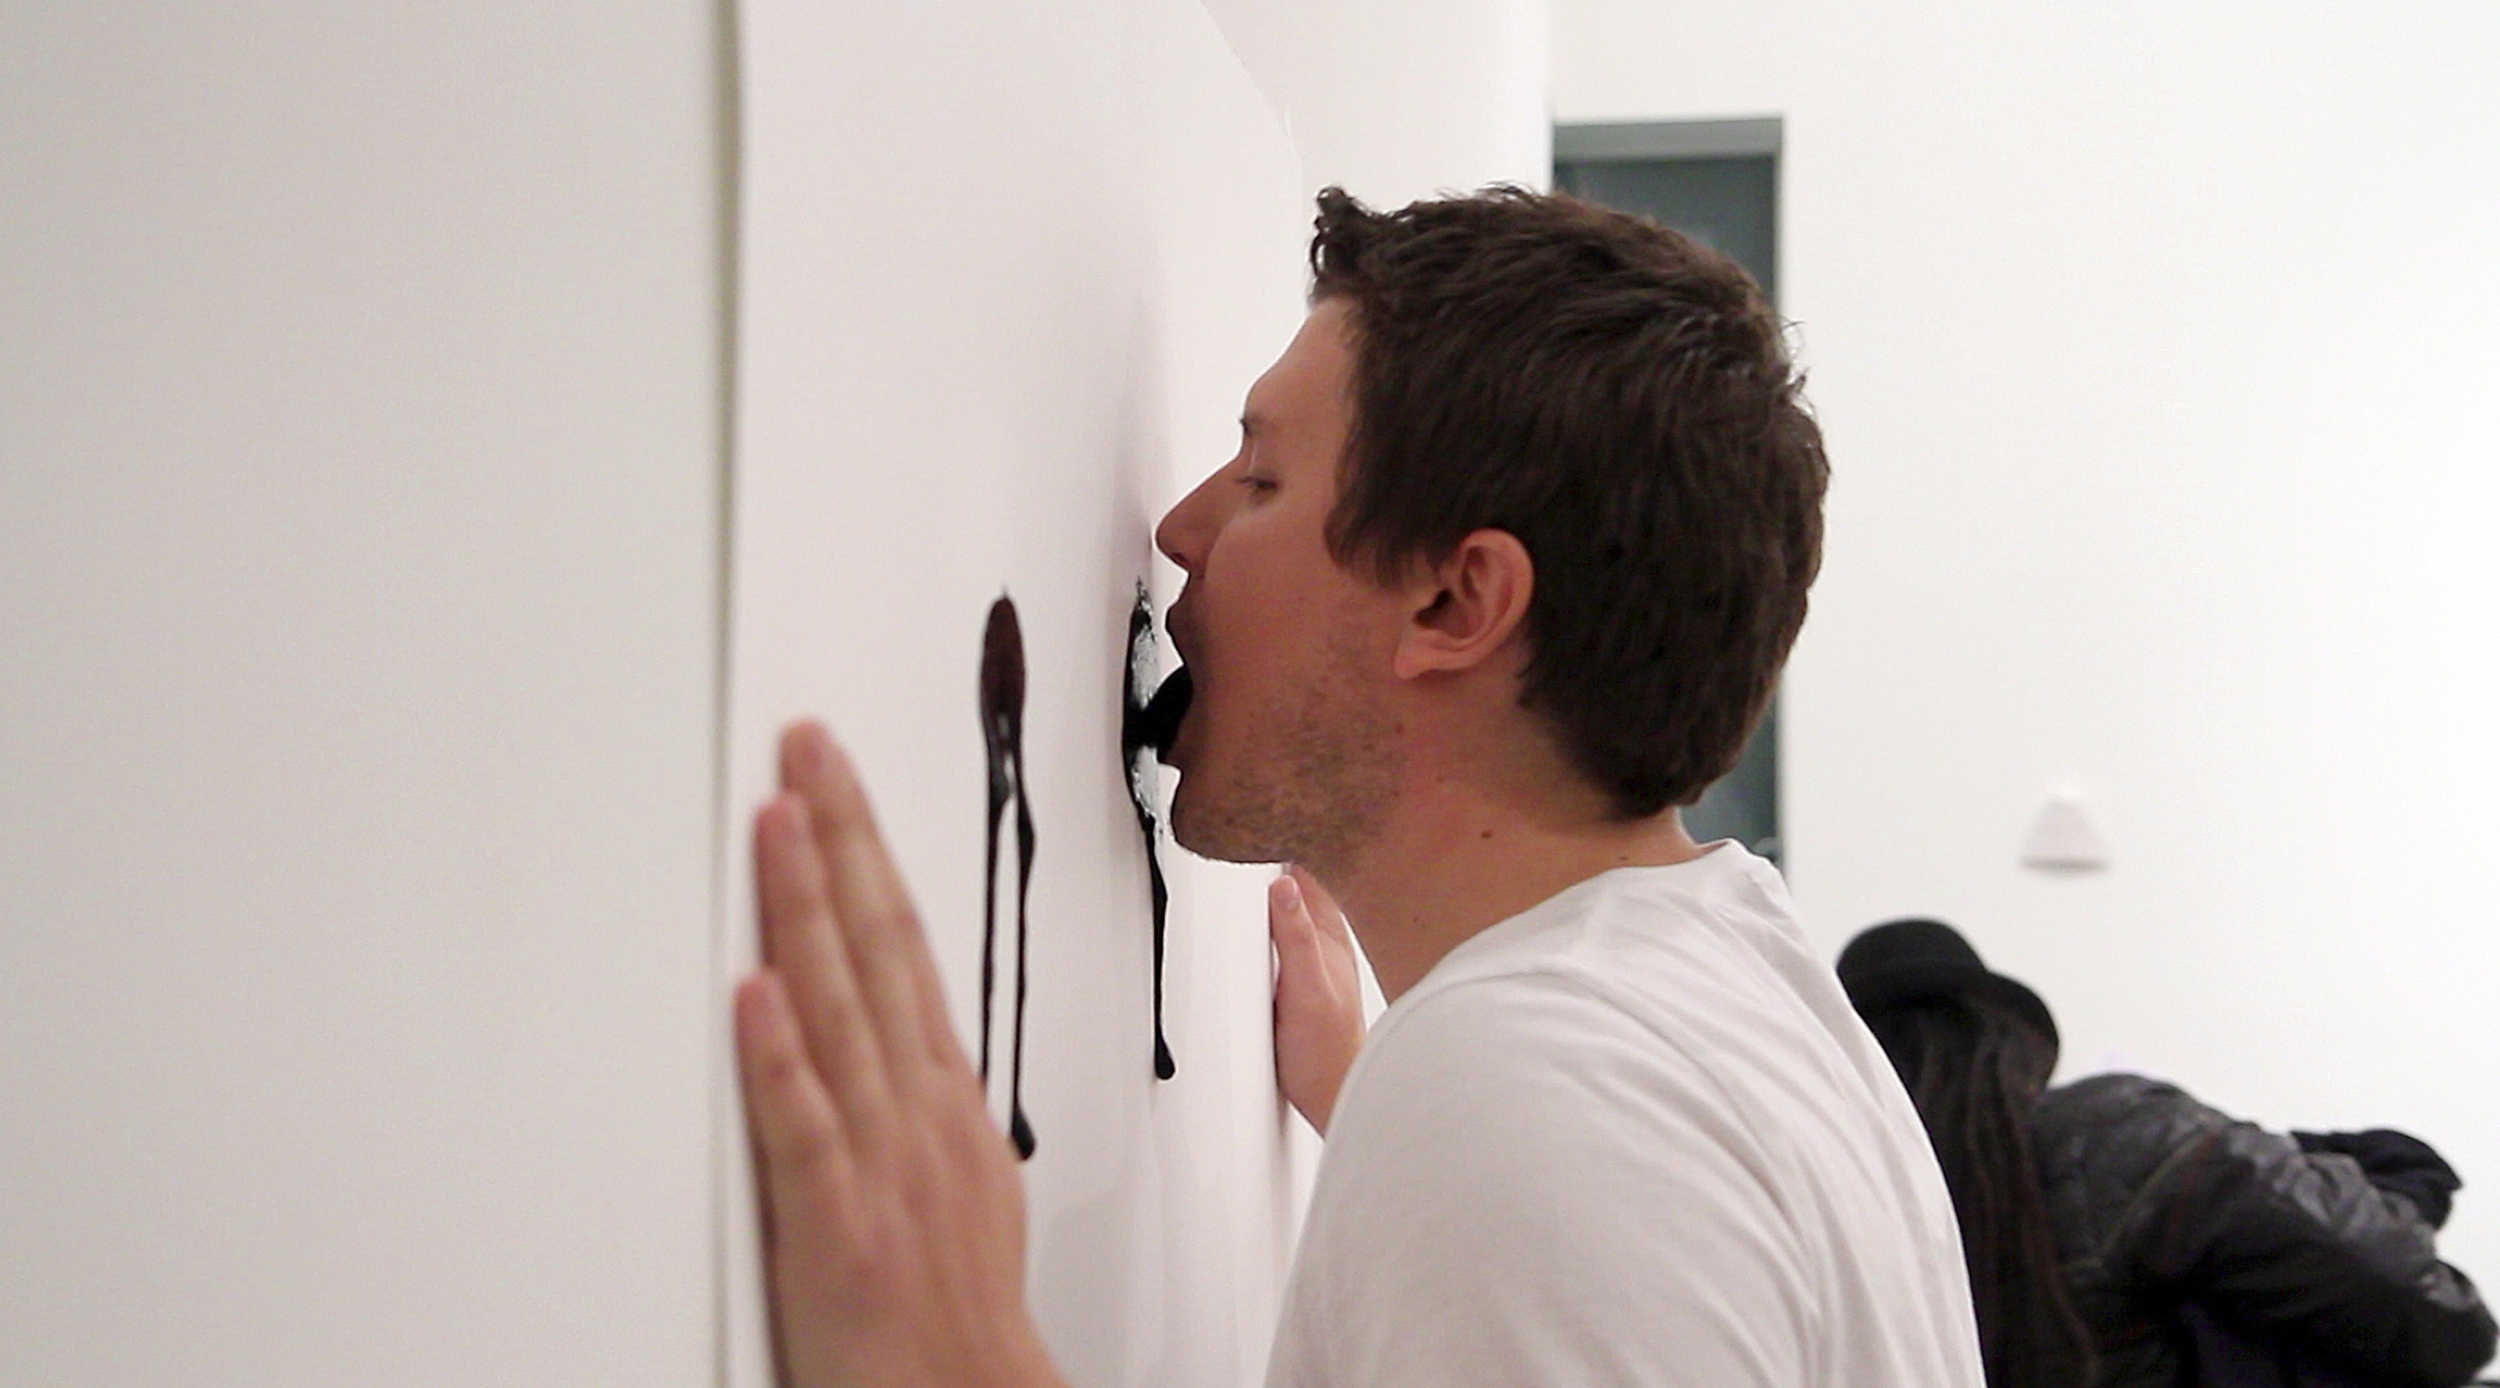   Attempting to Capture Taste (Spication, Rotation, Verrition)  Performance (Squid ink applied by tongue on paper) Duration 9:54 minutes Jaus Gallery, West Los Angeles, CA. November 10th, 2012  Video Courtesy of Sean Flaherty 